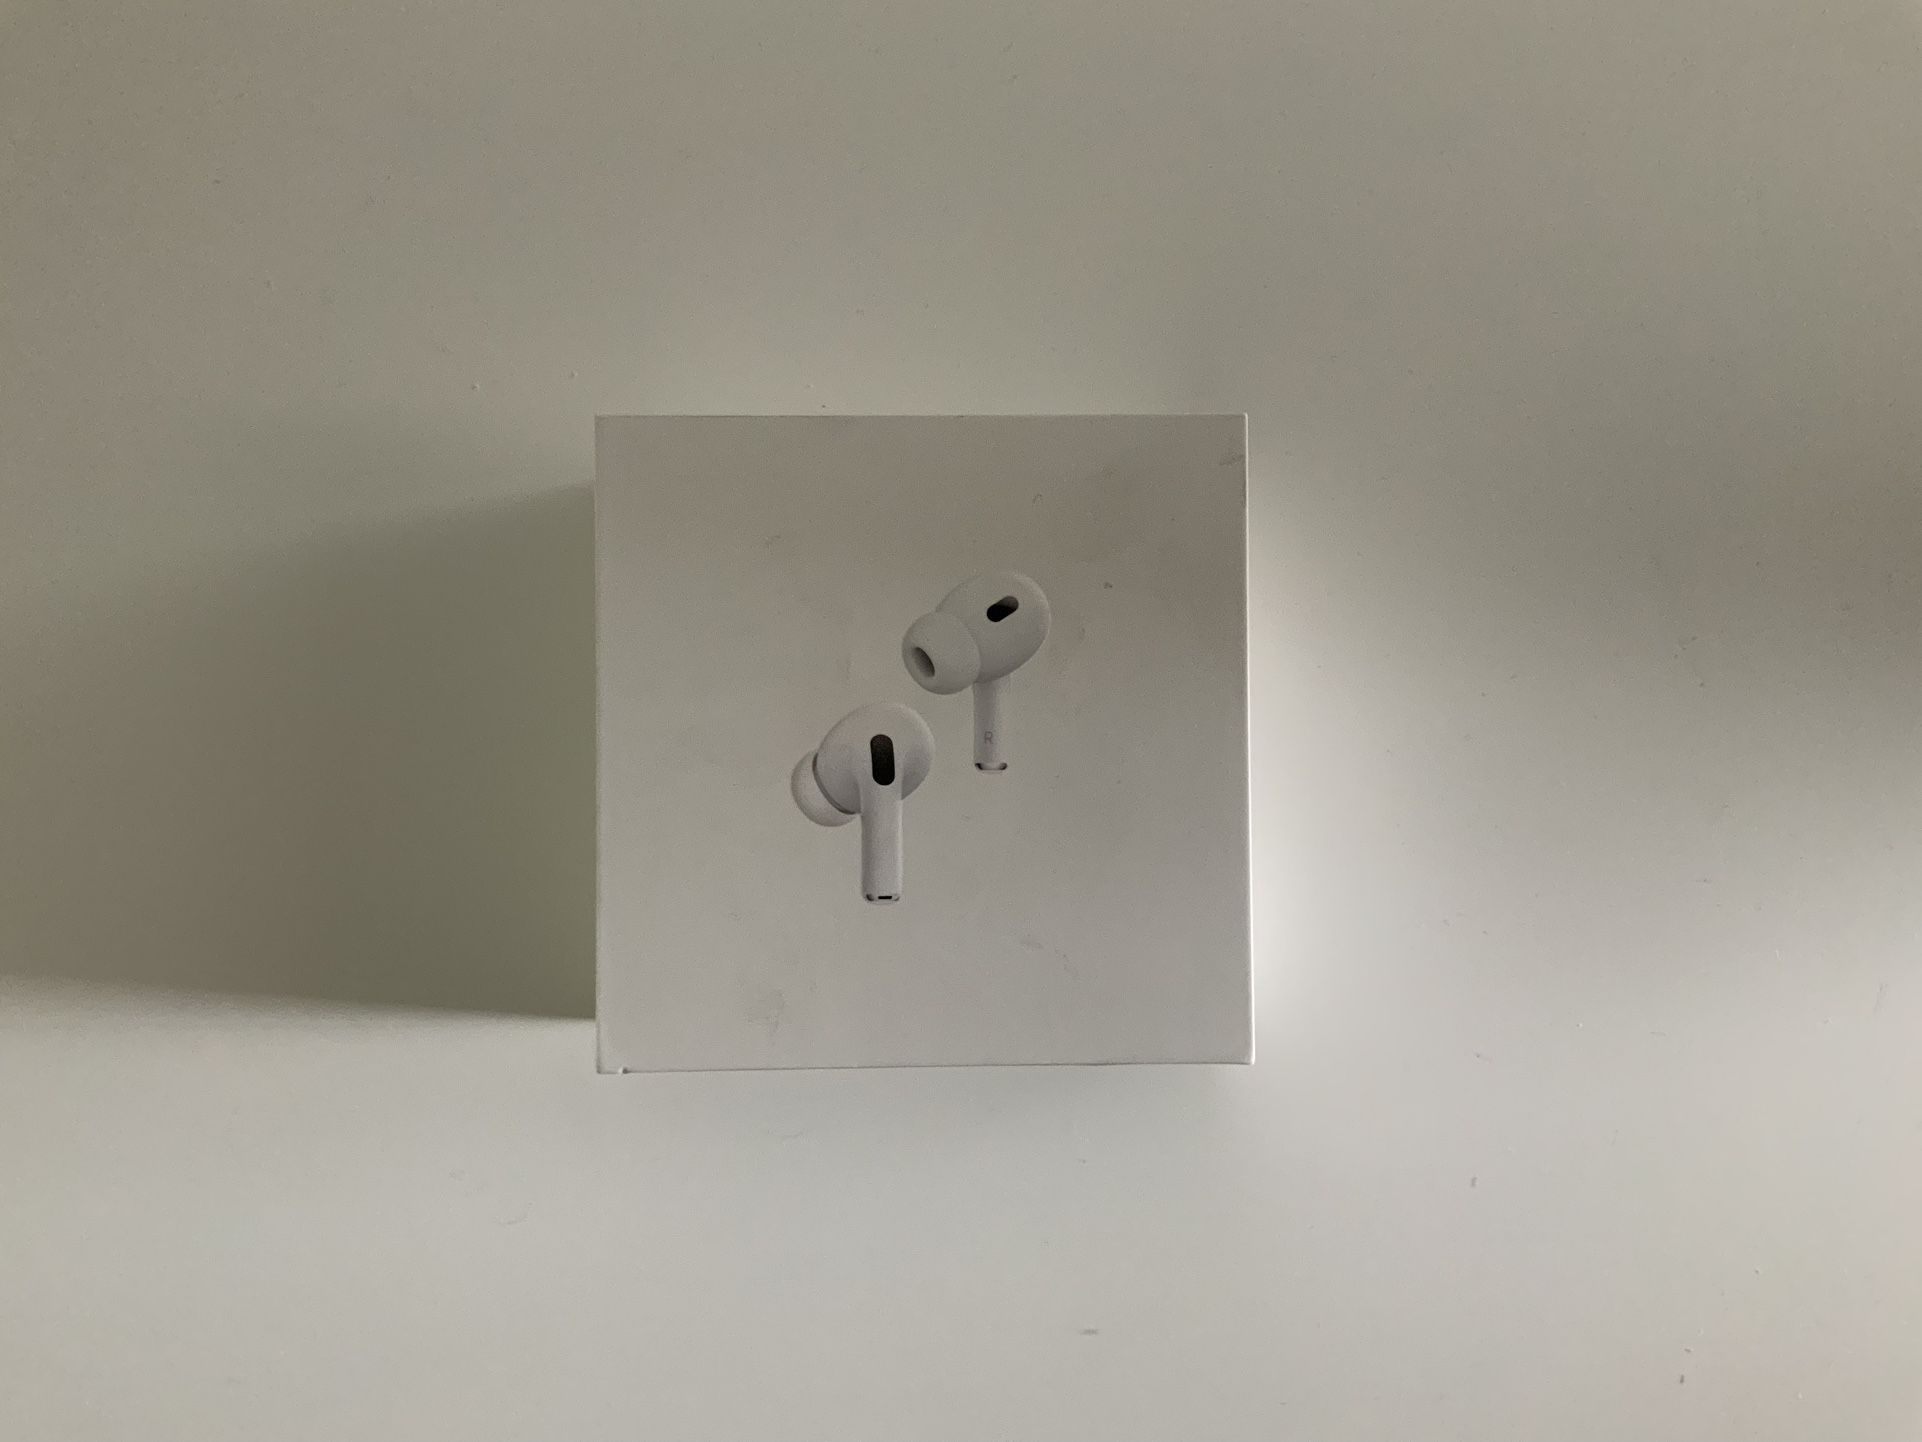 New Apple AirPods Pro 2nd Generation with MagSafe Wireless Charging Case